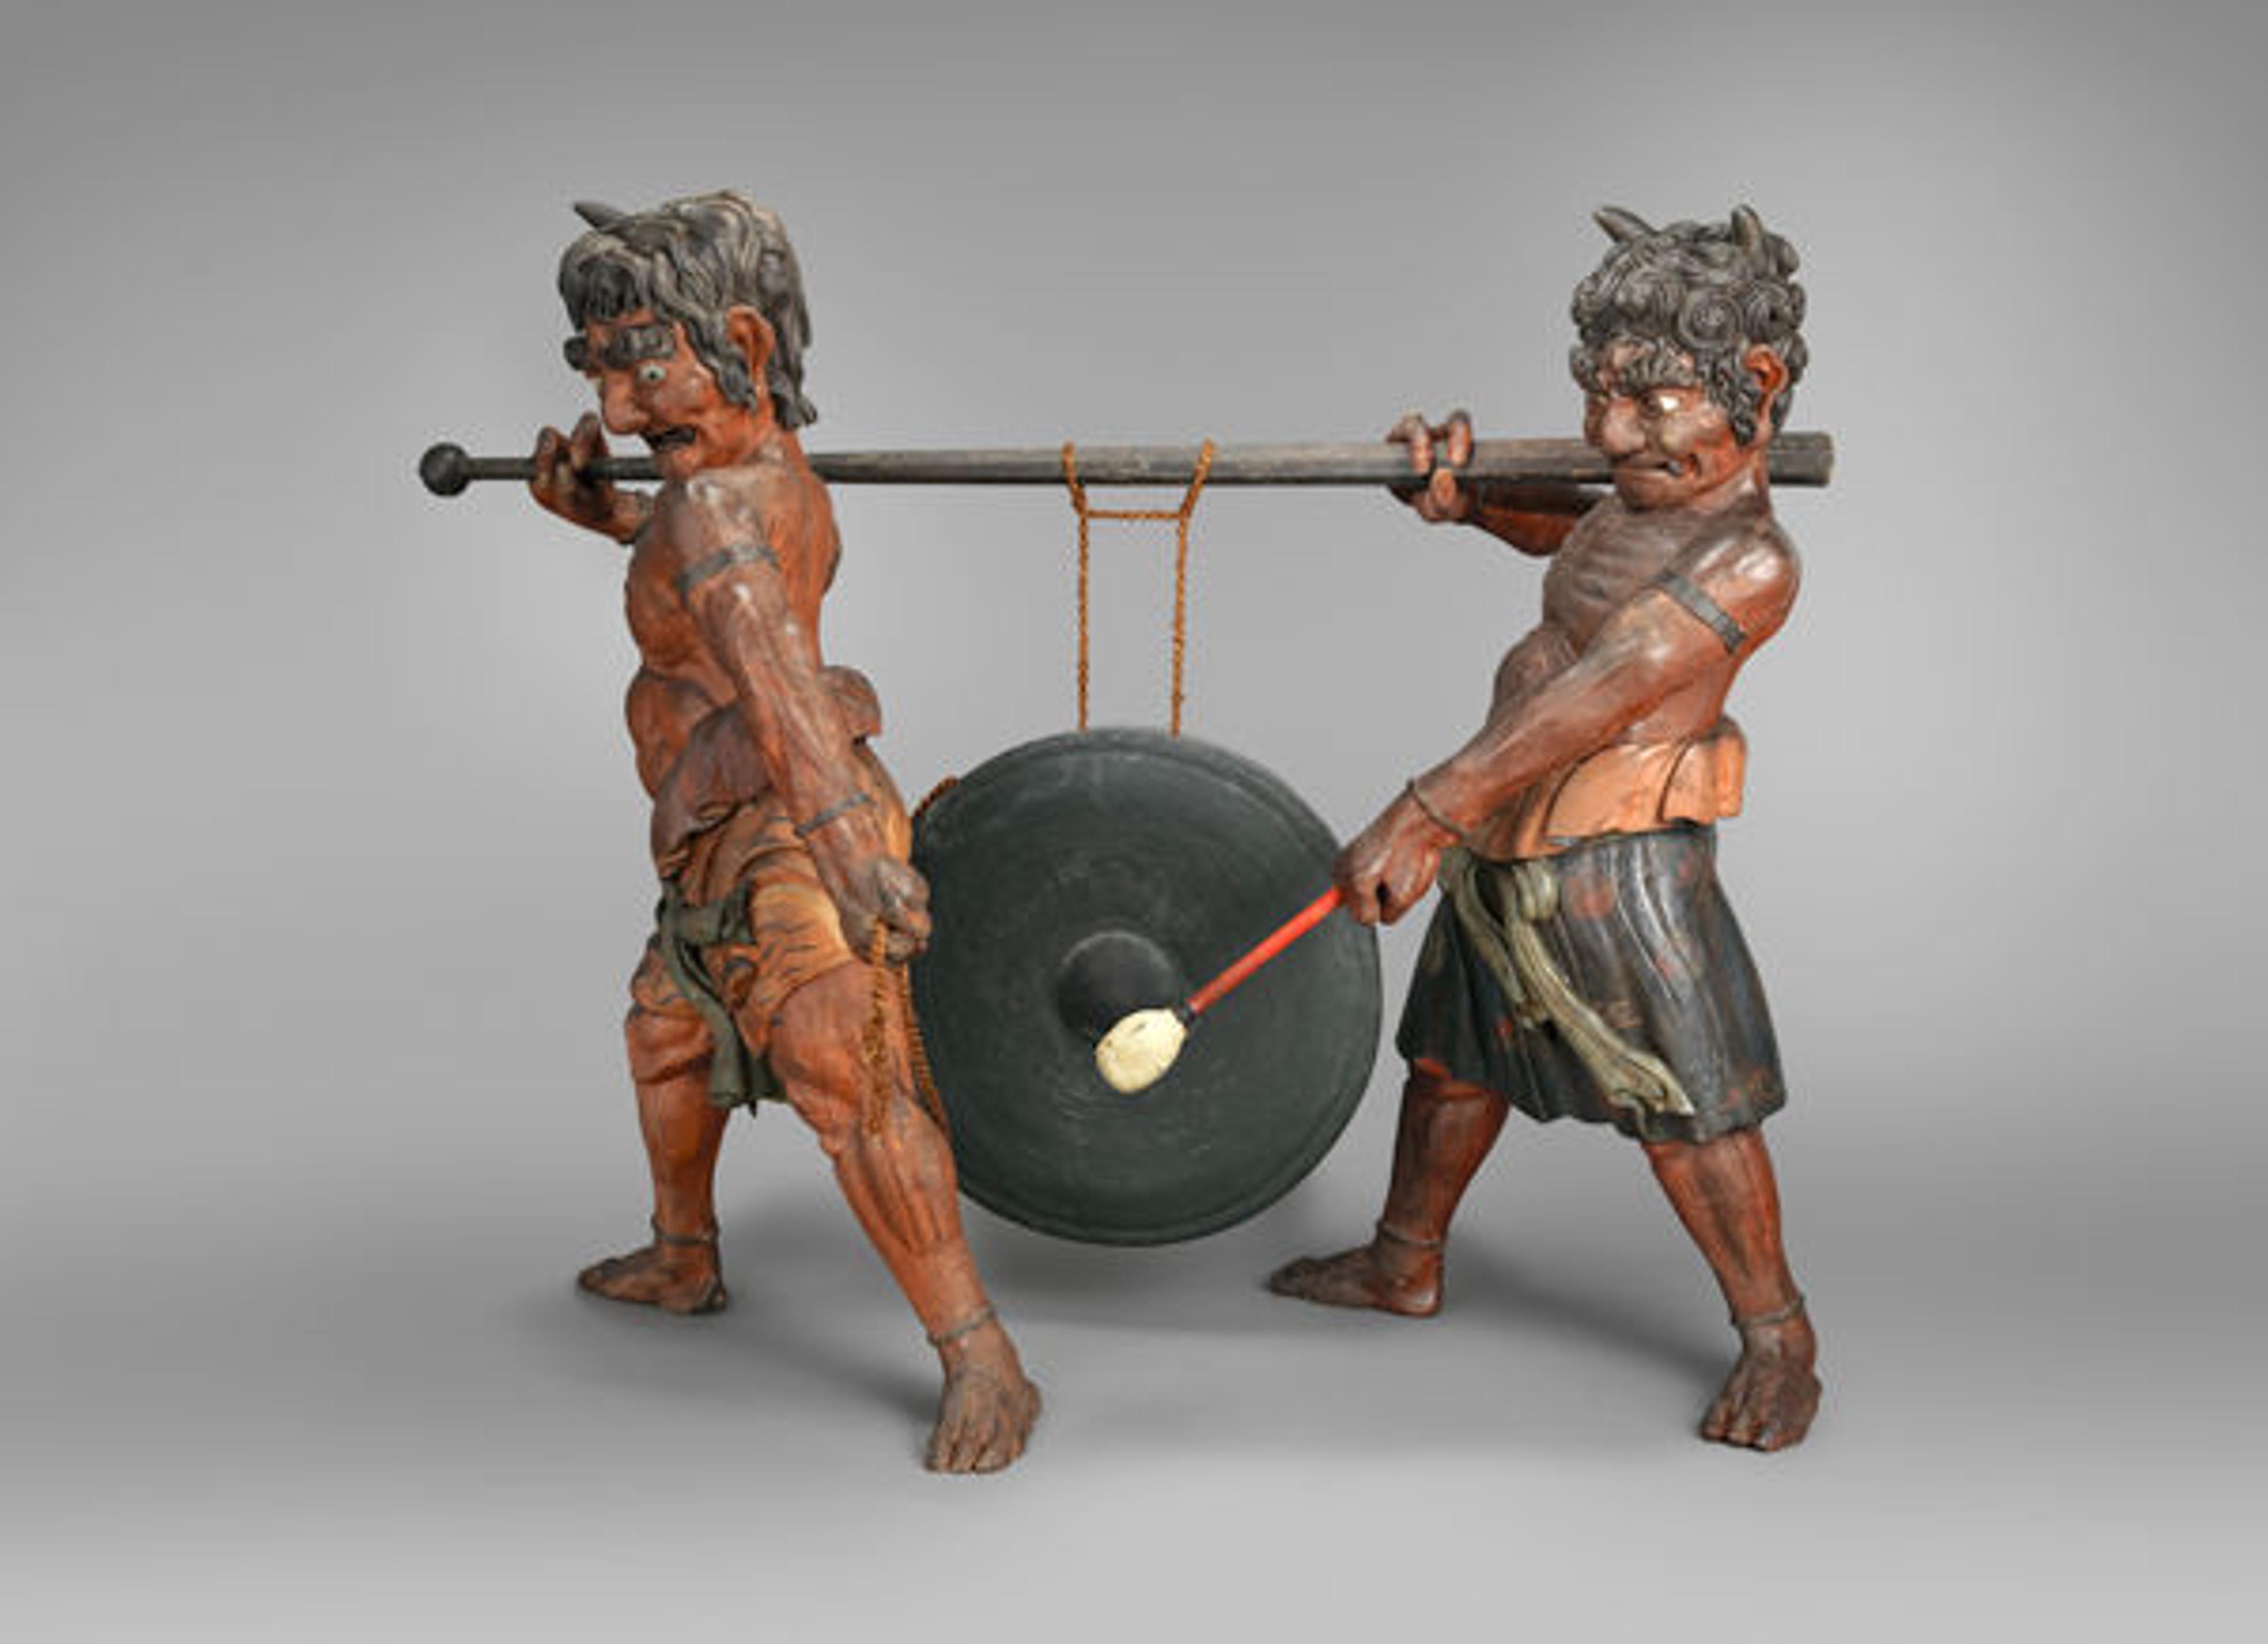 Gong Held by Oni. Japan, early 19th century (89.4.2016a–e)